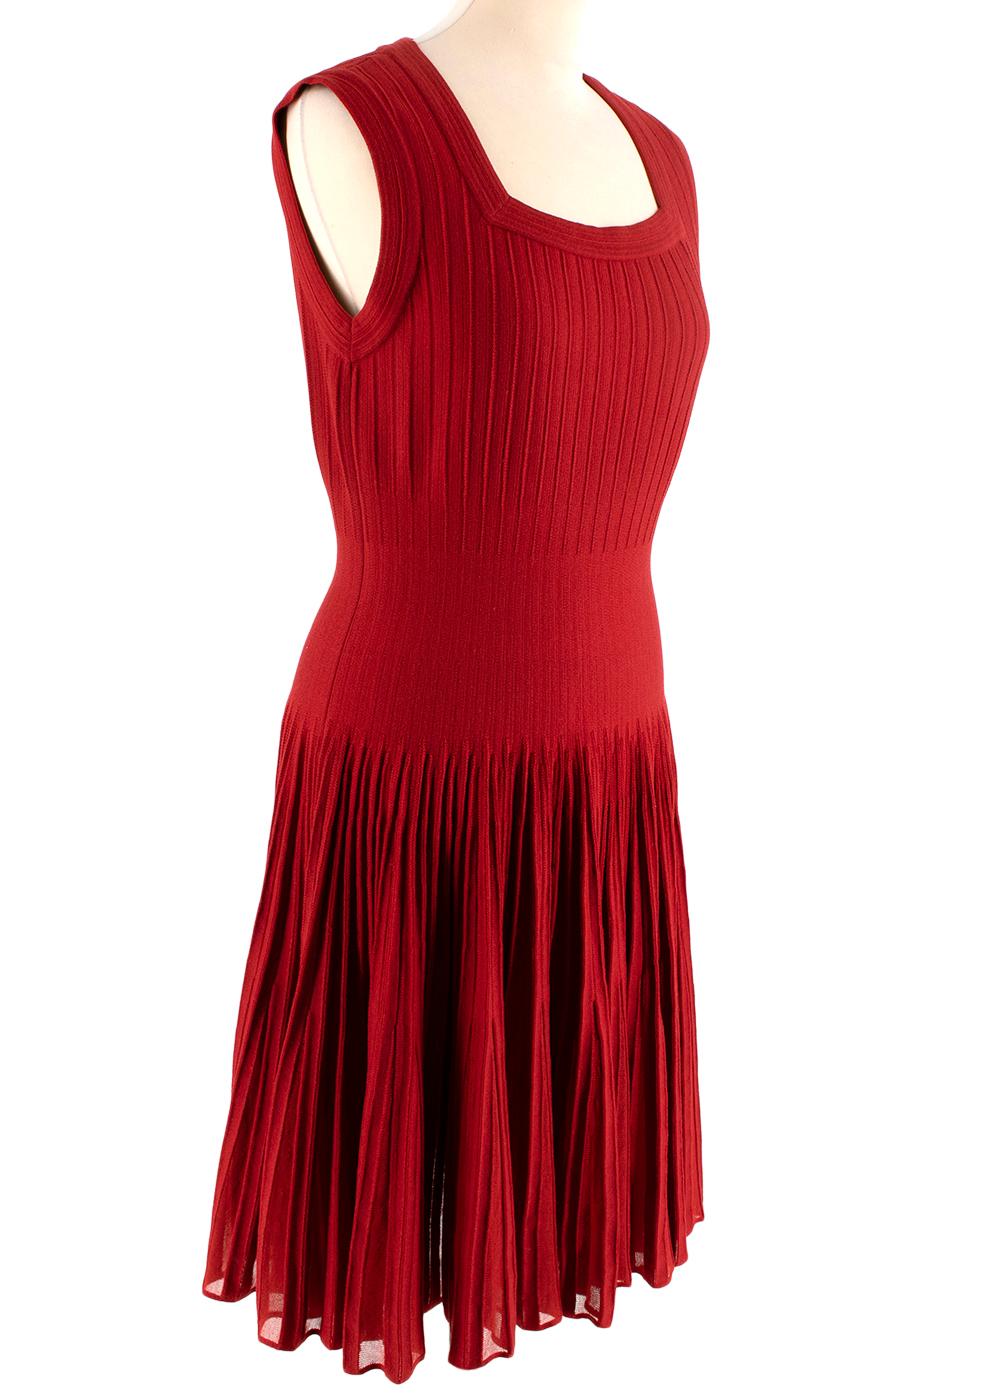 Alaia Red Stretch Knit Pleated Sleeveless Dress

- Fit & Flare Dress
- A squared neck 
- Sleeveless 
- Concealed zipper fastening

Materials: 
62% Wool 
19% Cotton 
19% Polyester and Polyamide 
Made in Italy 
Dry clean only 

PLEASE NOTE, THESE